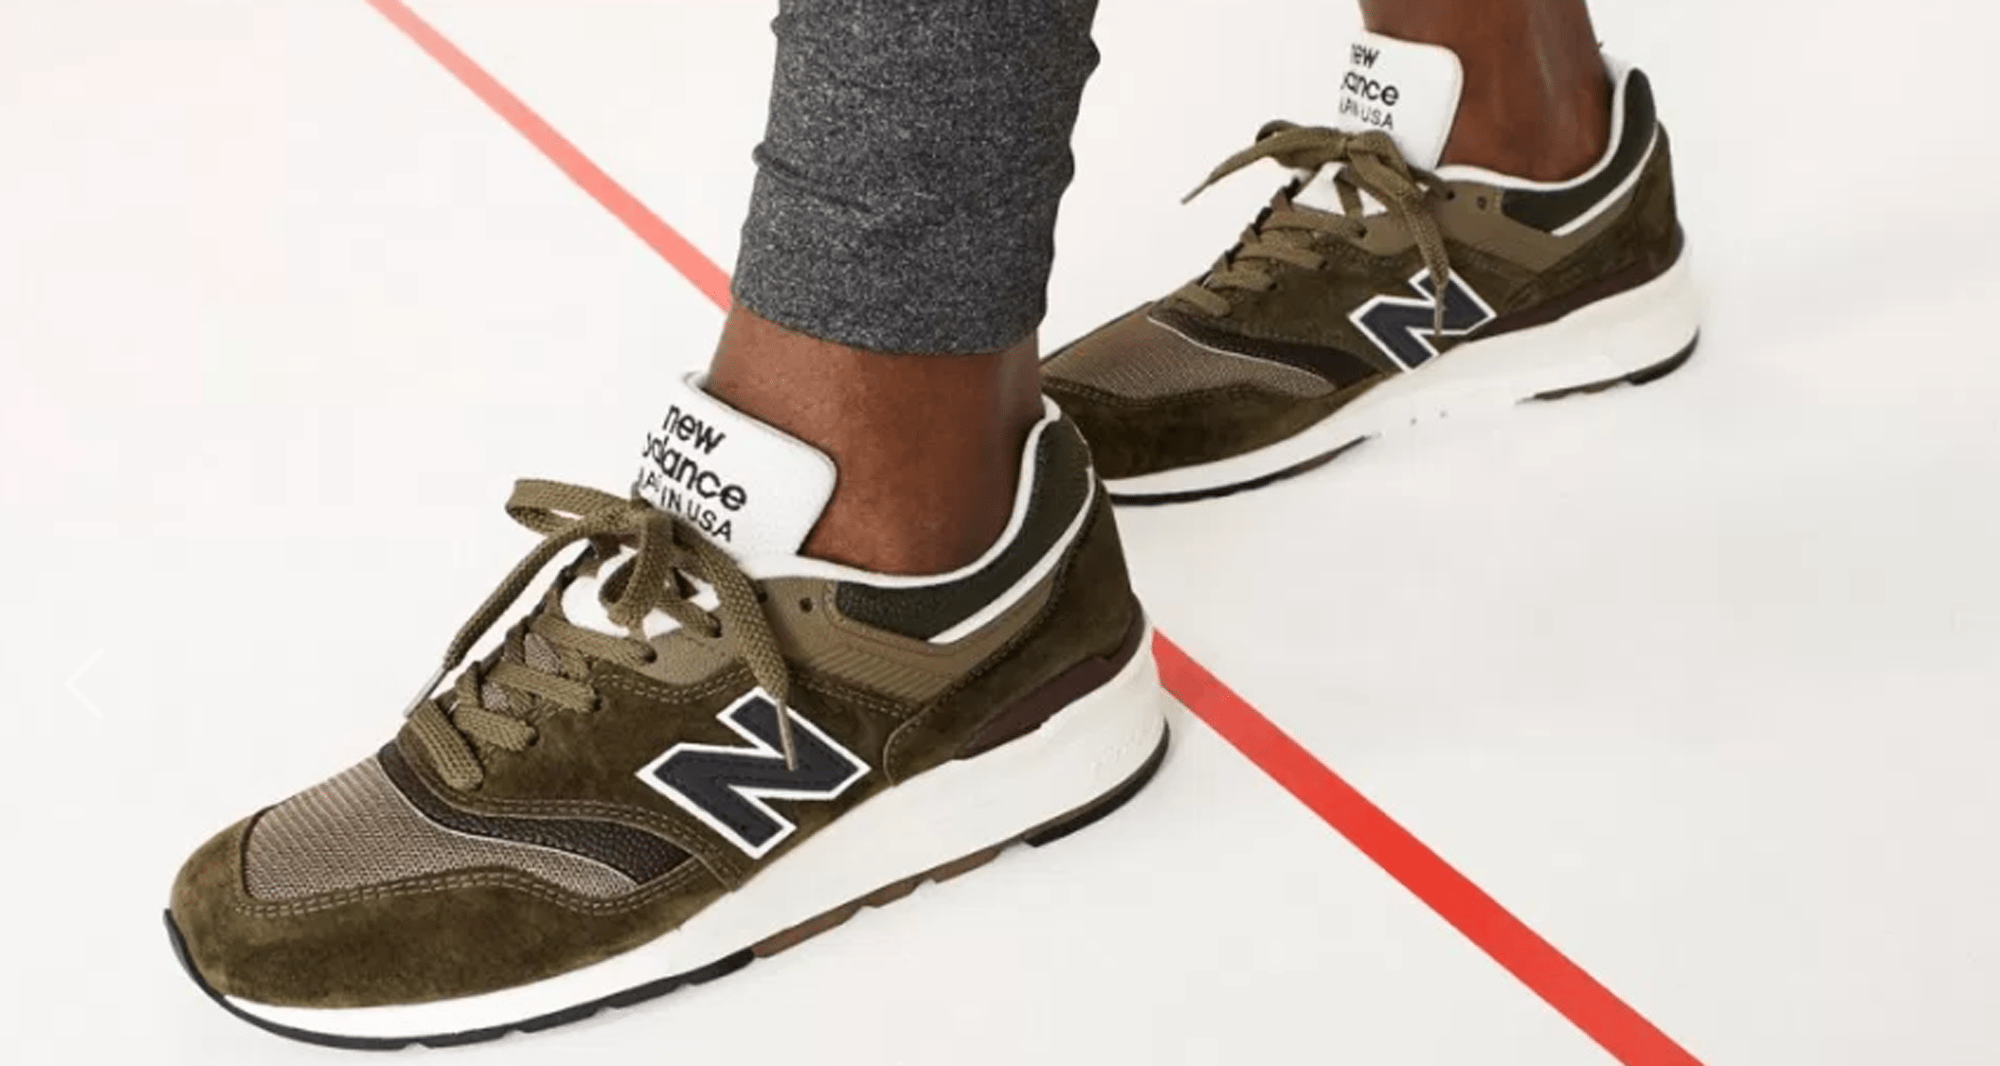 J.Crew and New Balance Join Forces for 997 